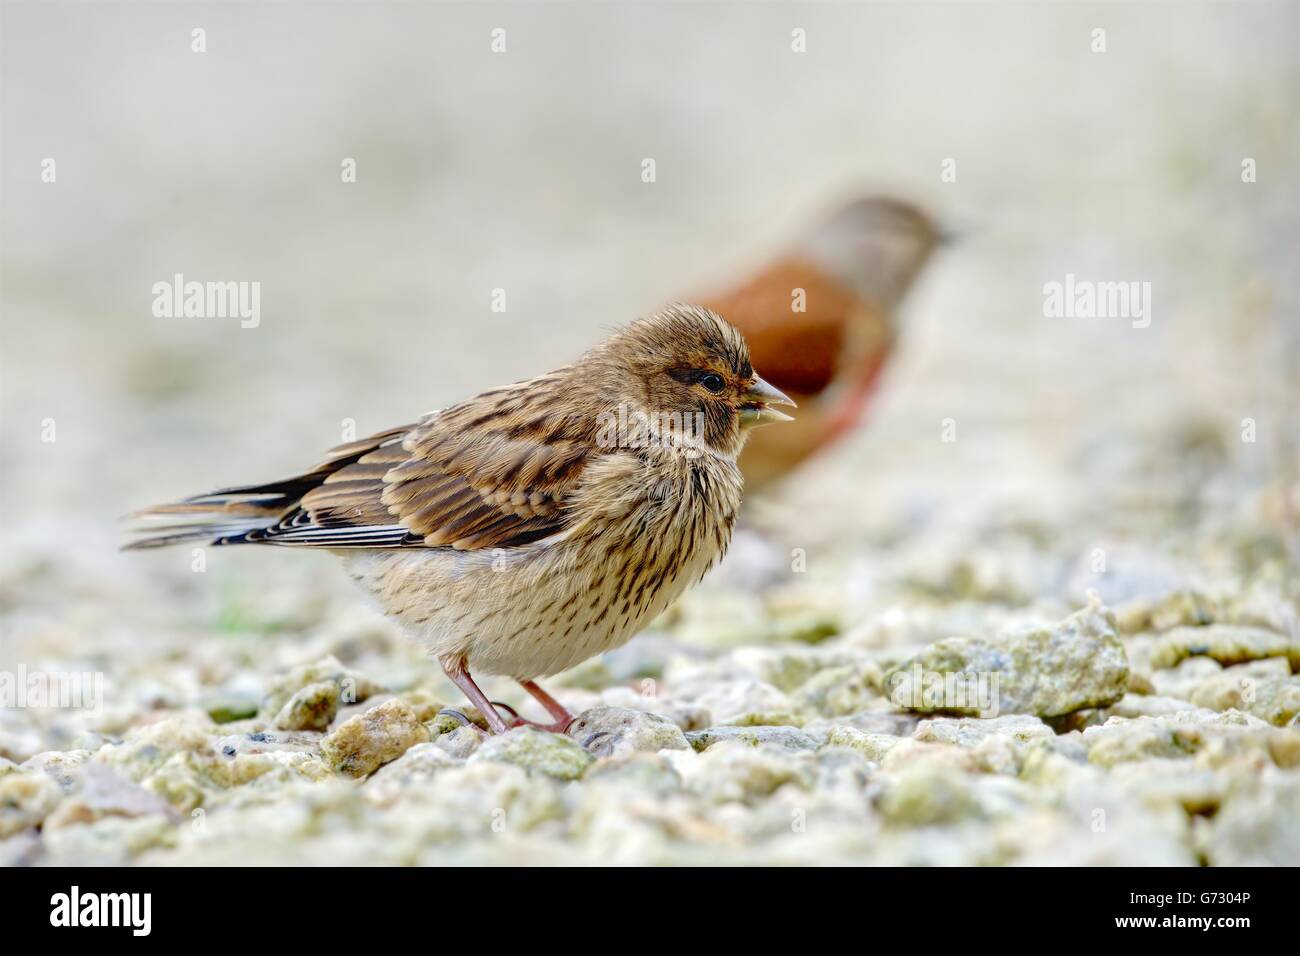 A sharply rendered and detailed Baby Linnet shadowed by a colorful blurred male adult guardian on a background of pebbles. Stock Photo